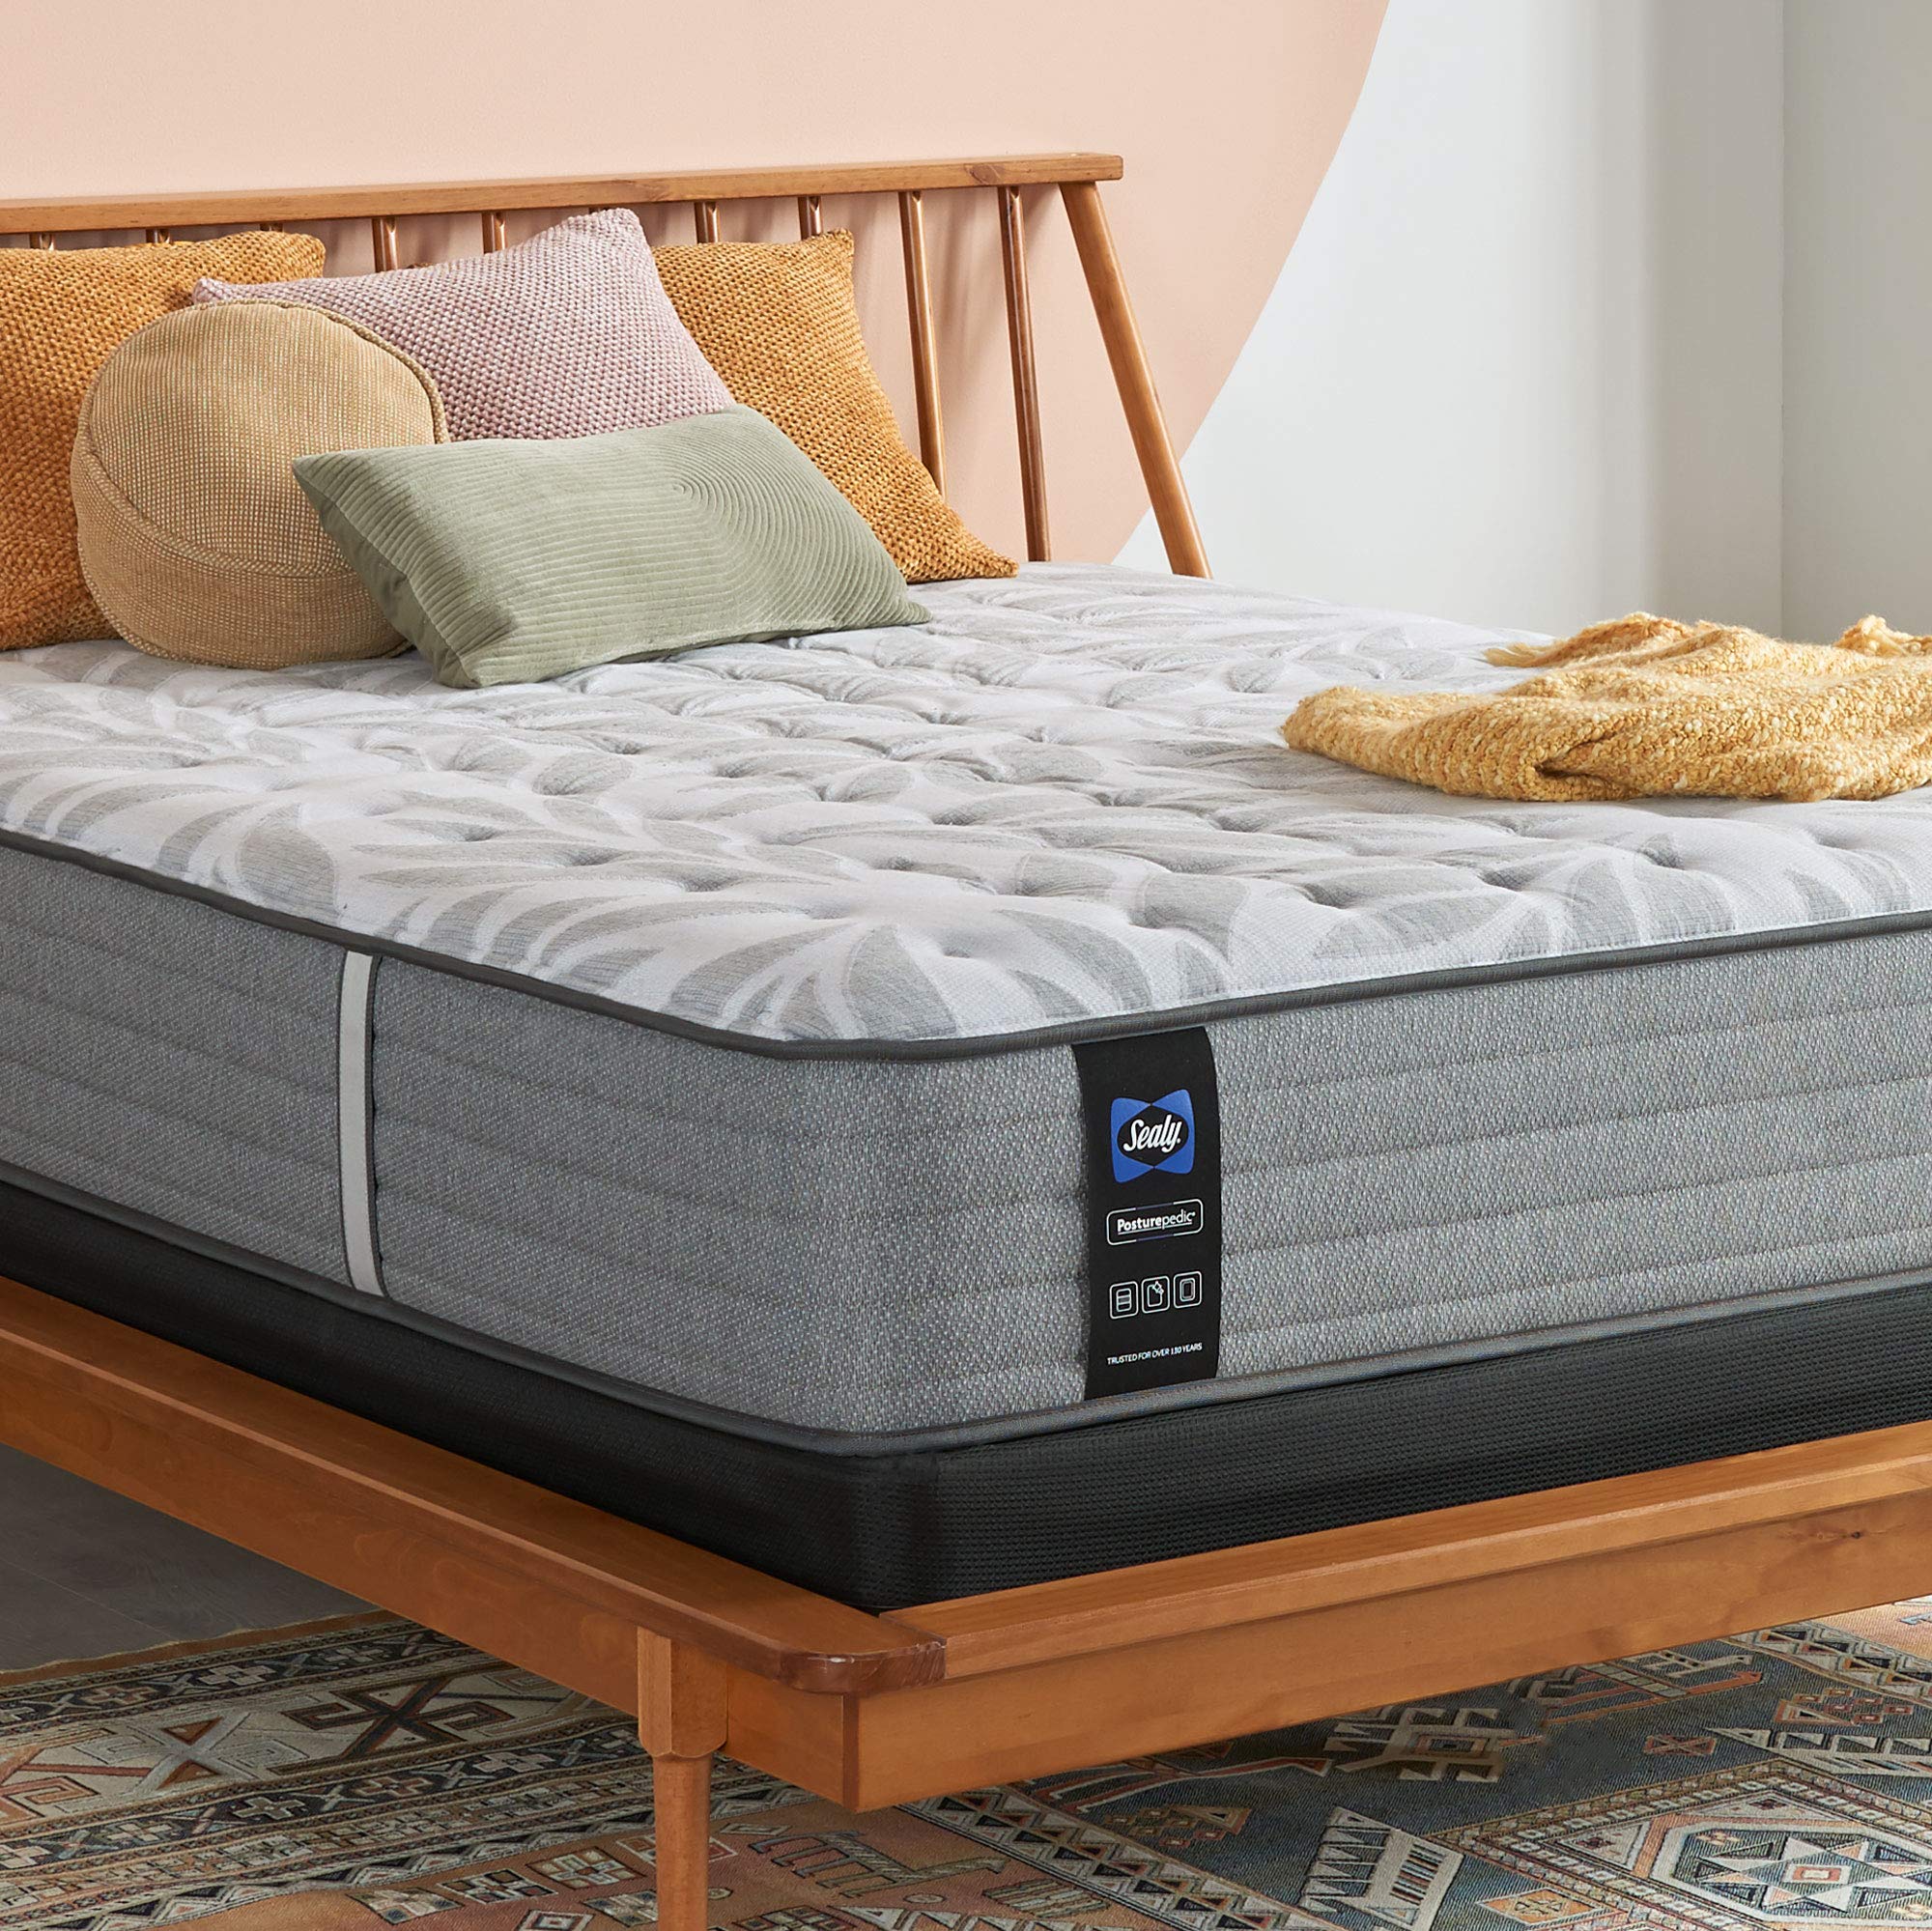 Pricing Of Sealy Mattress